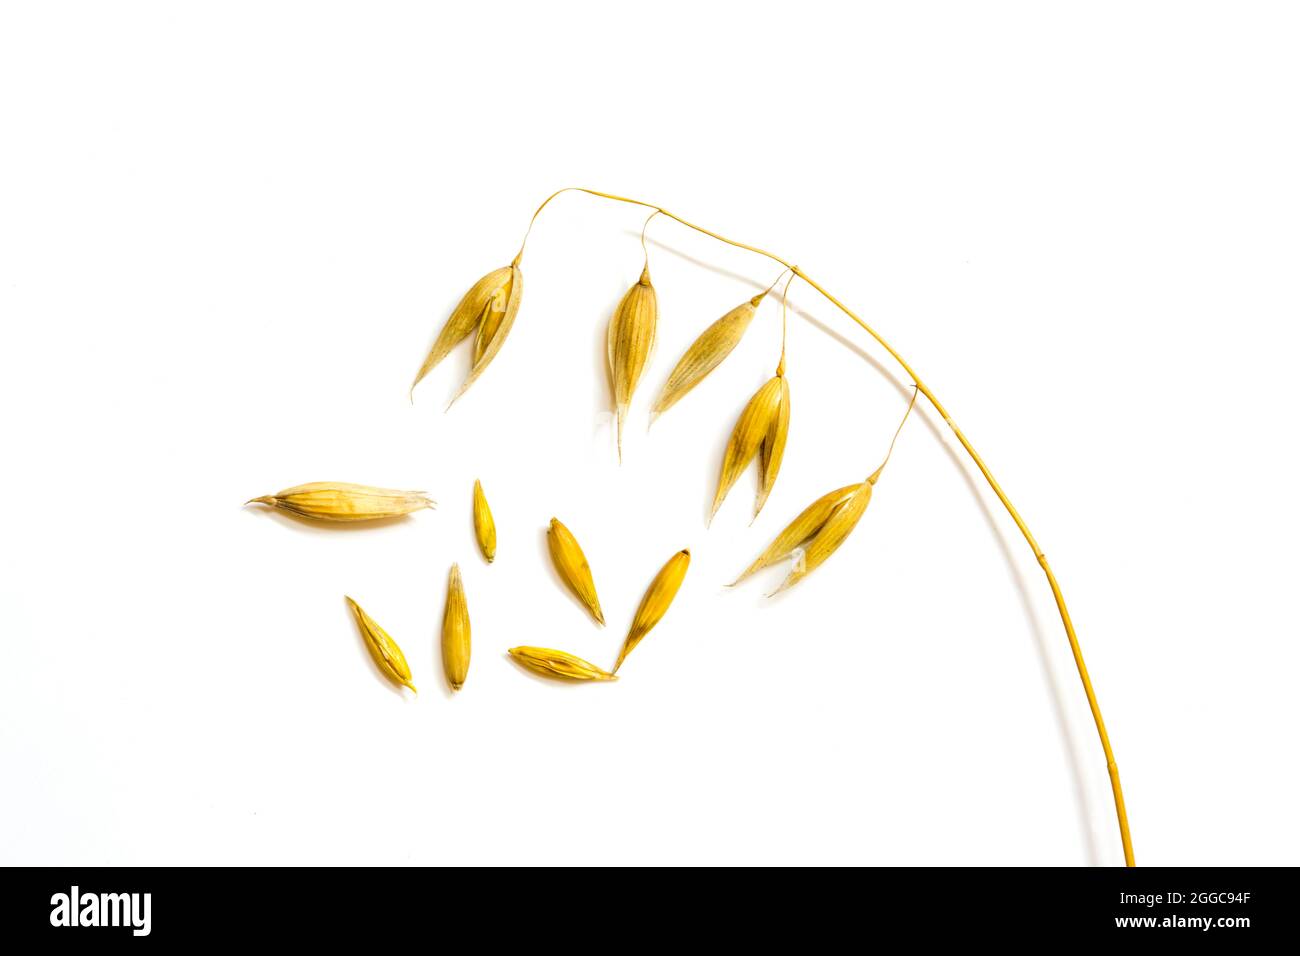 Oat ears, oat plant on a white background. Stock Photo